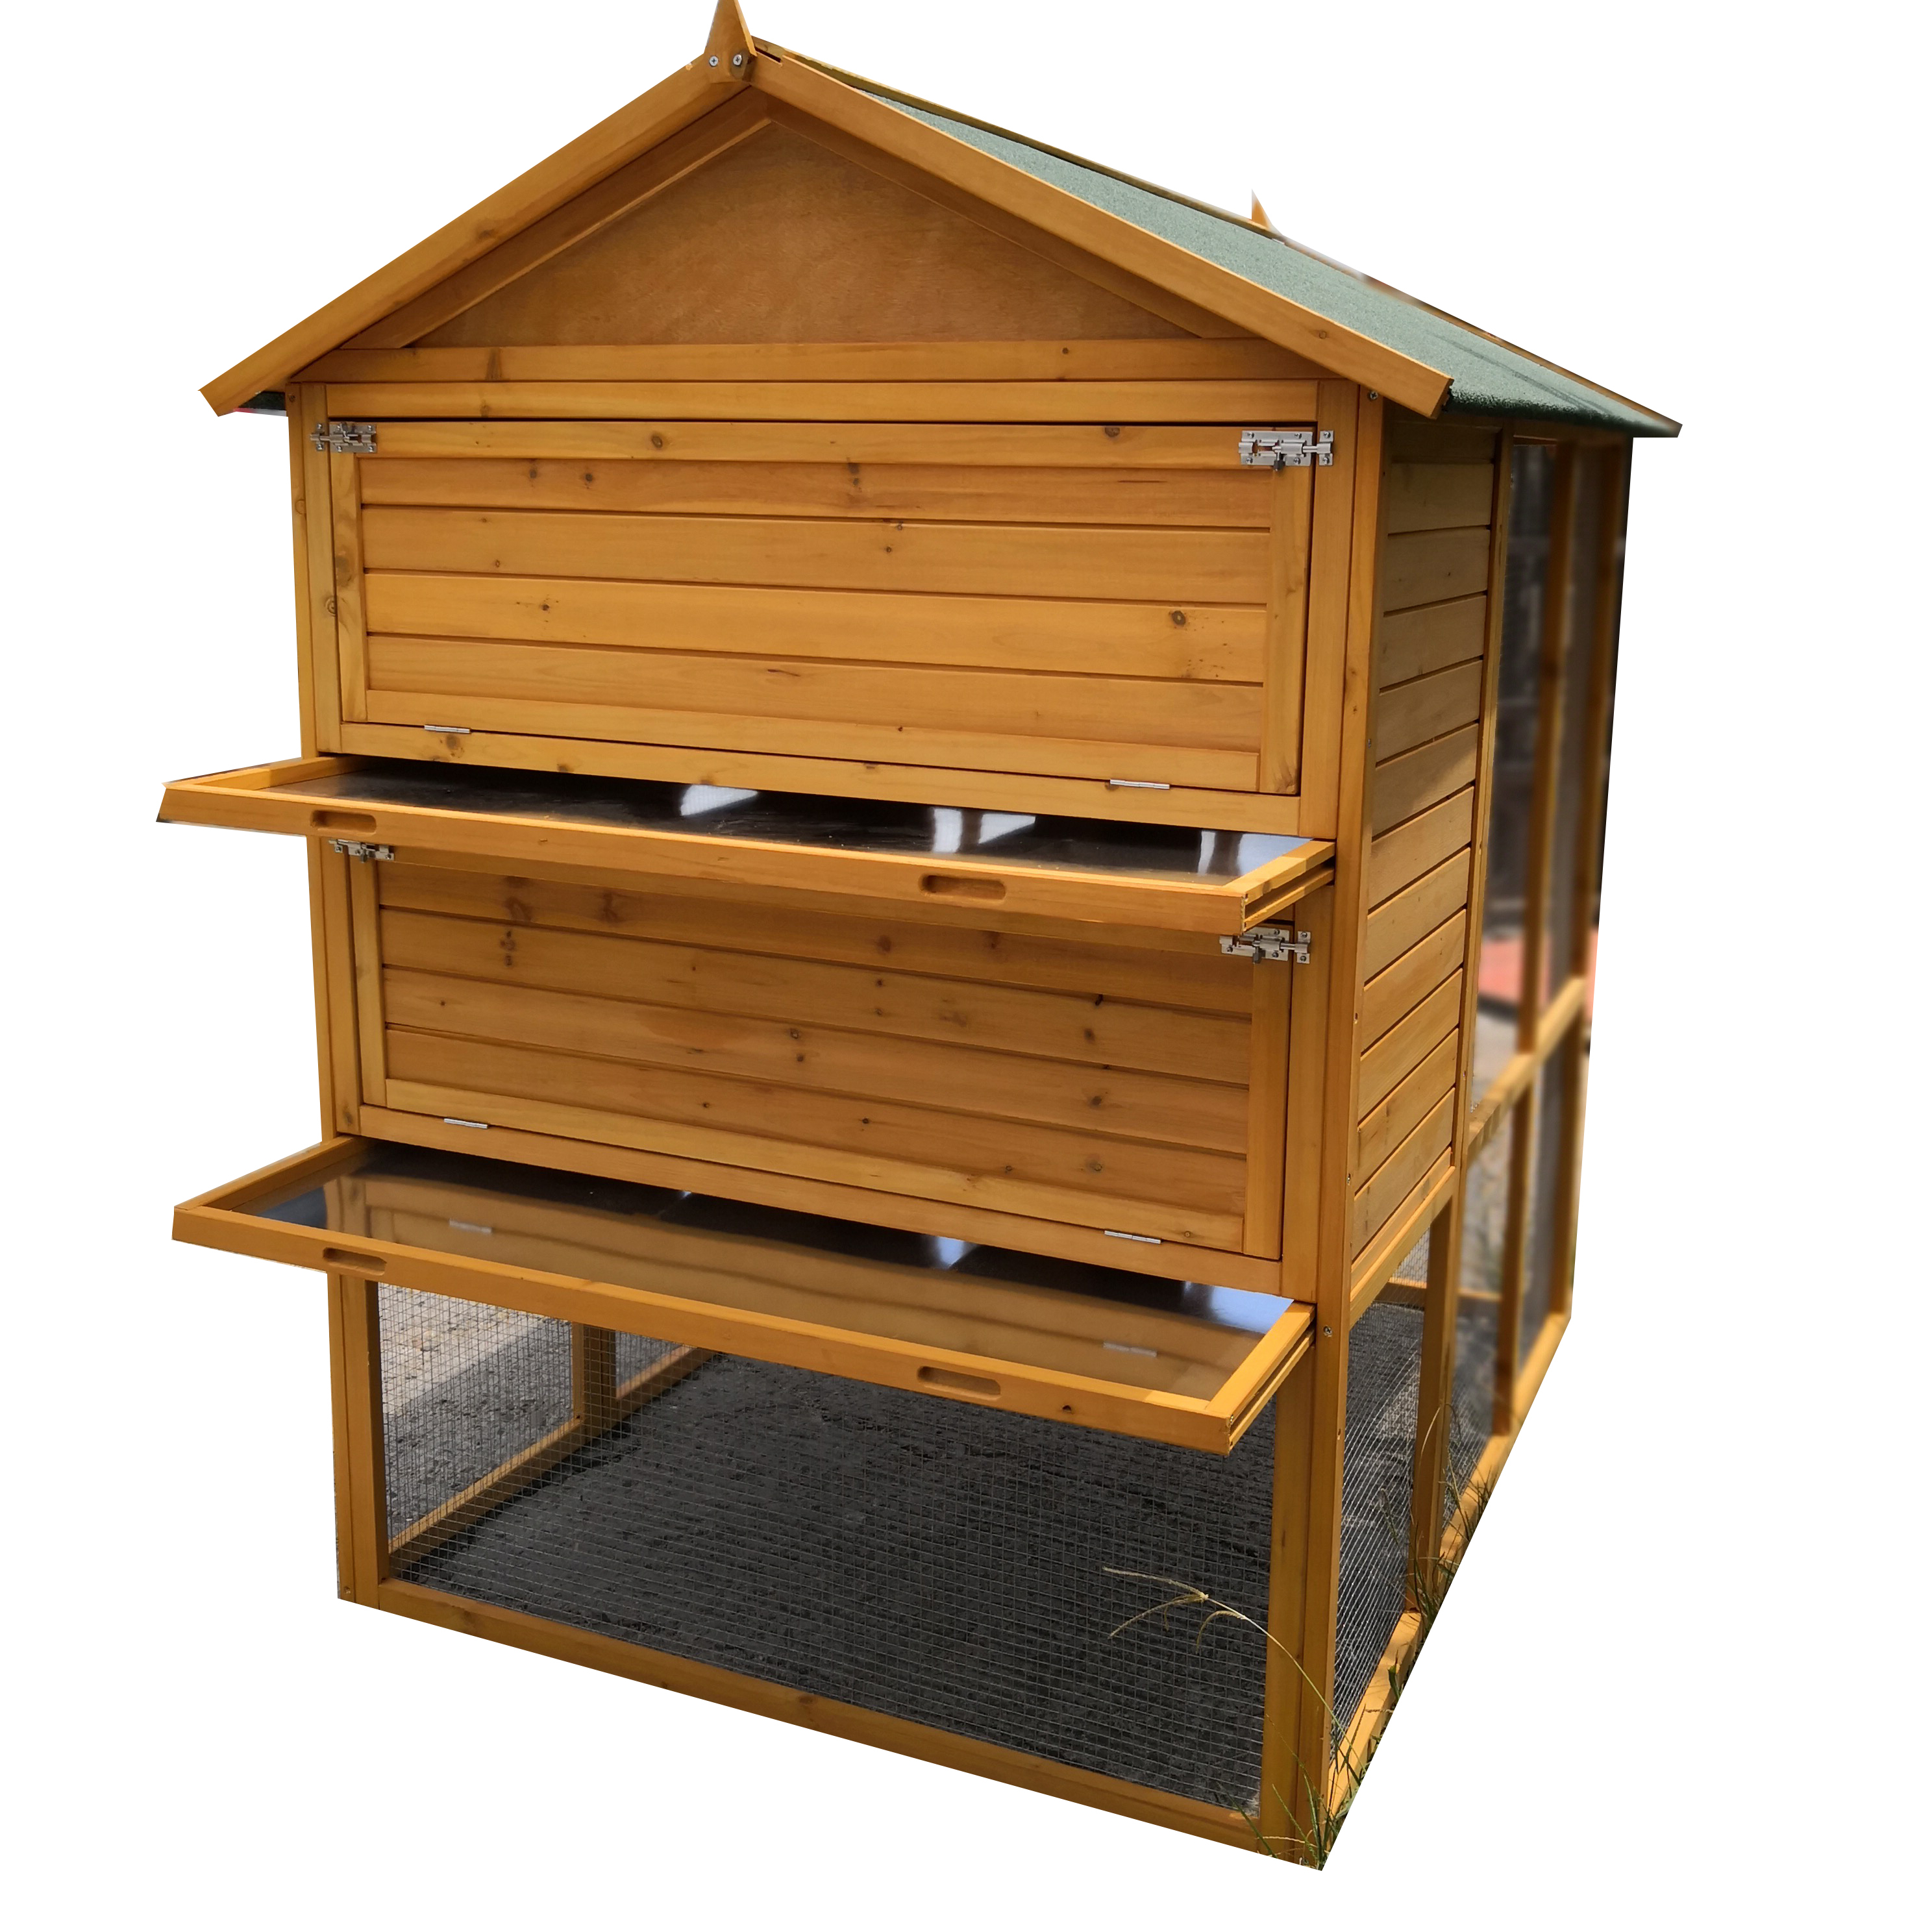 Wholesale price luxury wooden bird cage pigeon lofts for sale